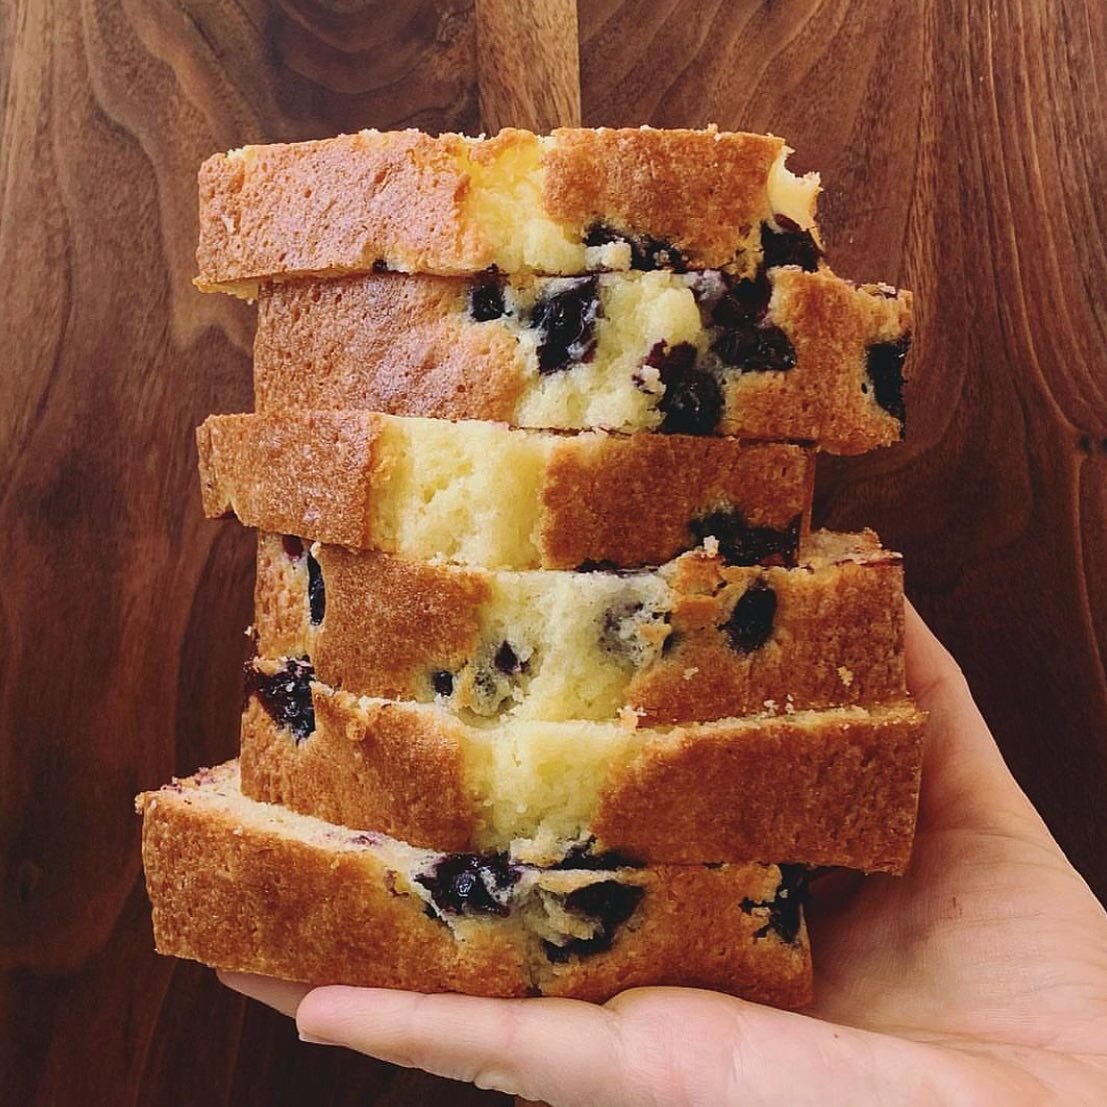 🫐🍋🫐🍋🫐 Lemon Blueberry Pound Cakes! Oooooh &mdash; Ahhhhh! Today is the start of our work week: This is the day we do all the ingredient ordering, menu making, emailing, calendar stuff/planning of kitchen duties each day, invoicing, accounting, I